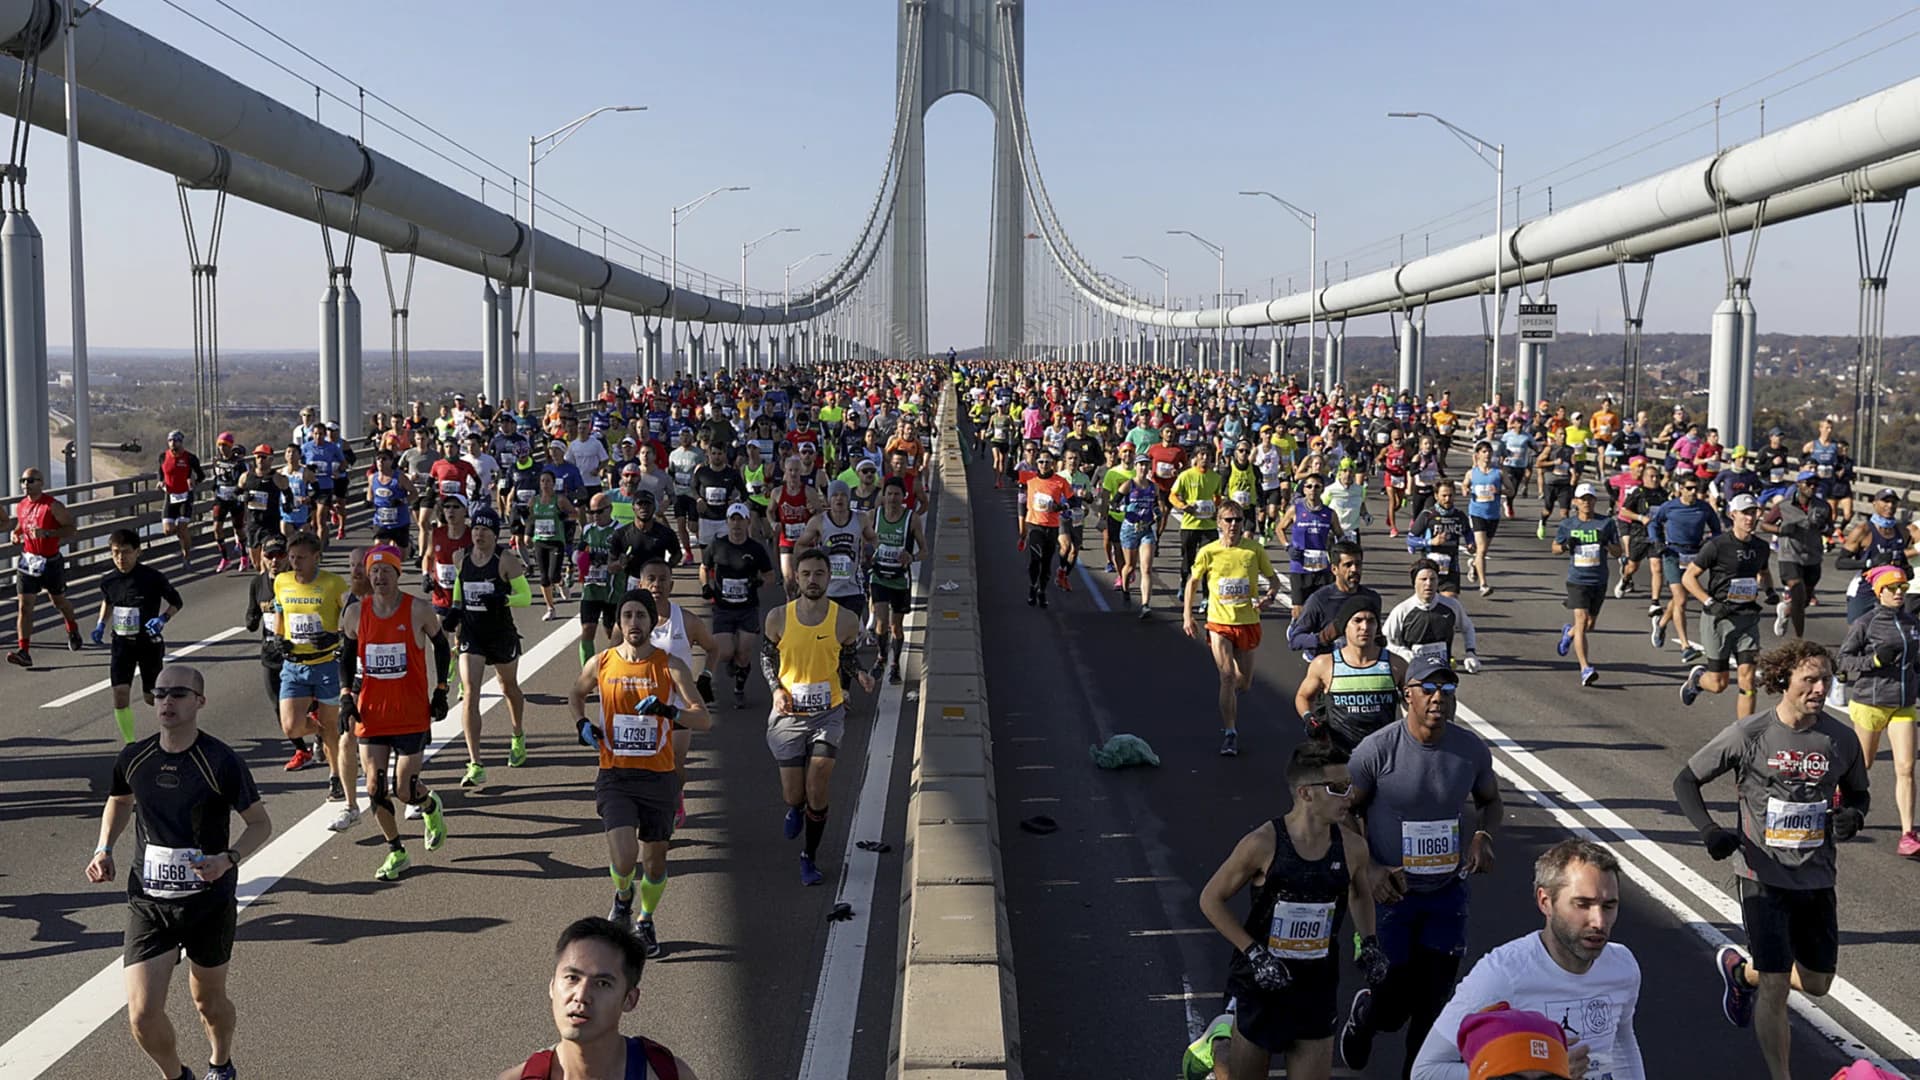 The NYC marathon returns Sunday to the Big Apple. Here’s everything you need to know.